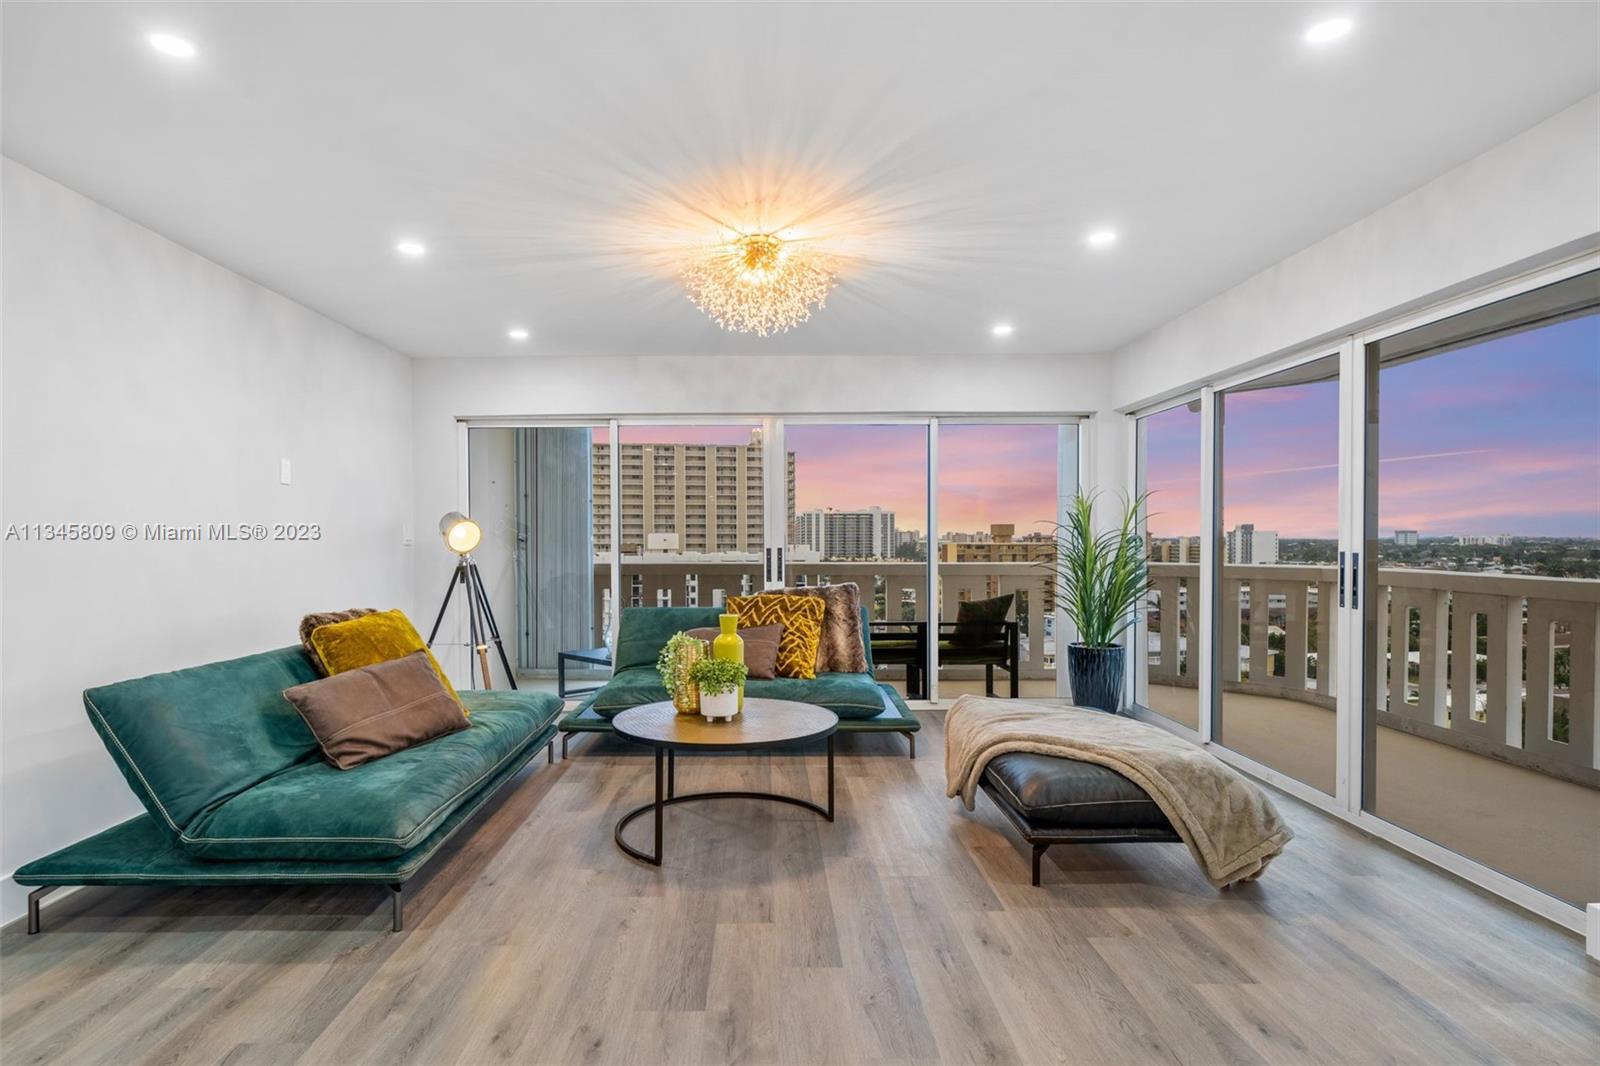 Enjoy breathtaking OCEAN & CITY VIEWS from the large WRAP-AROUND balcony in this fully remodeled, MO